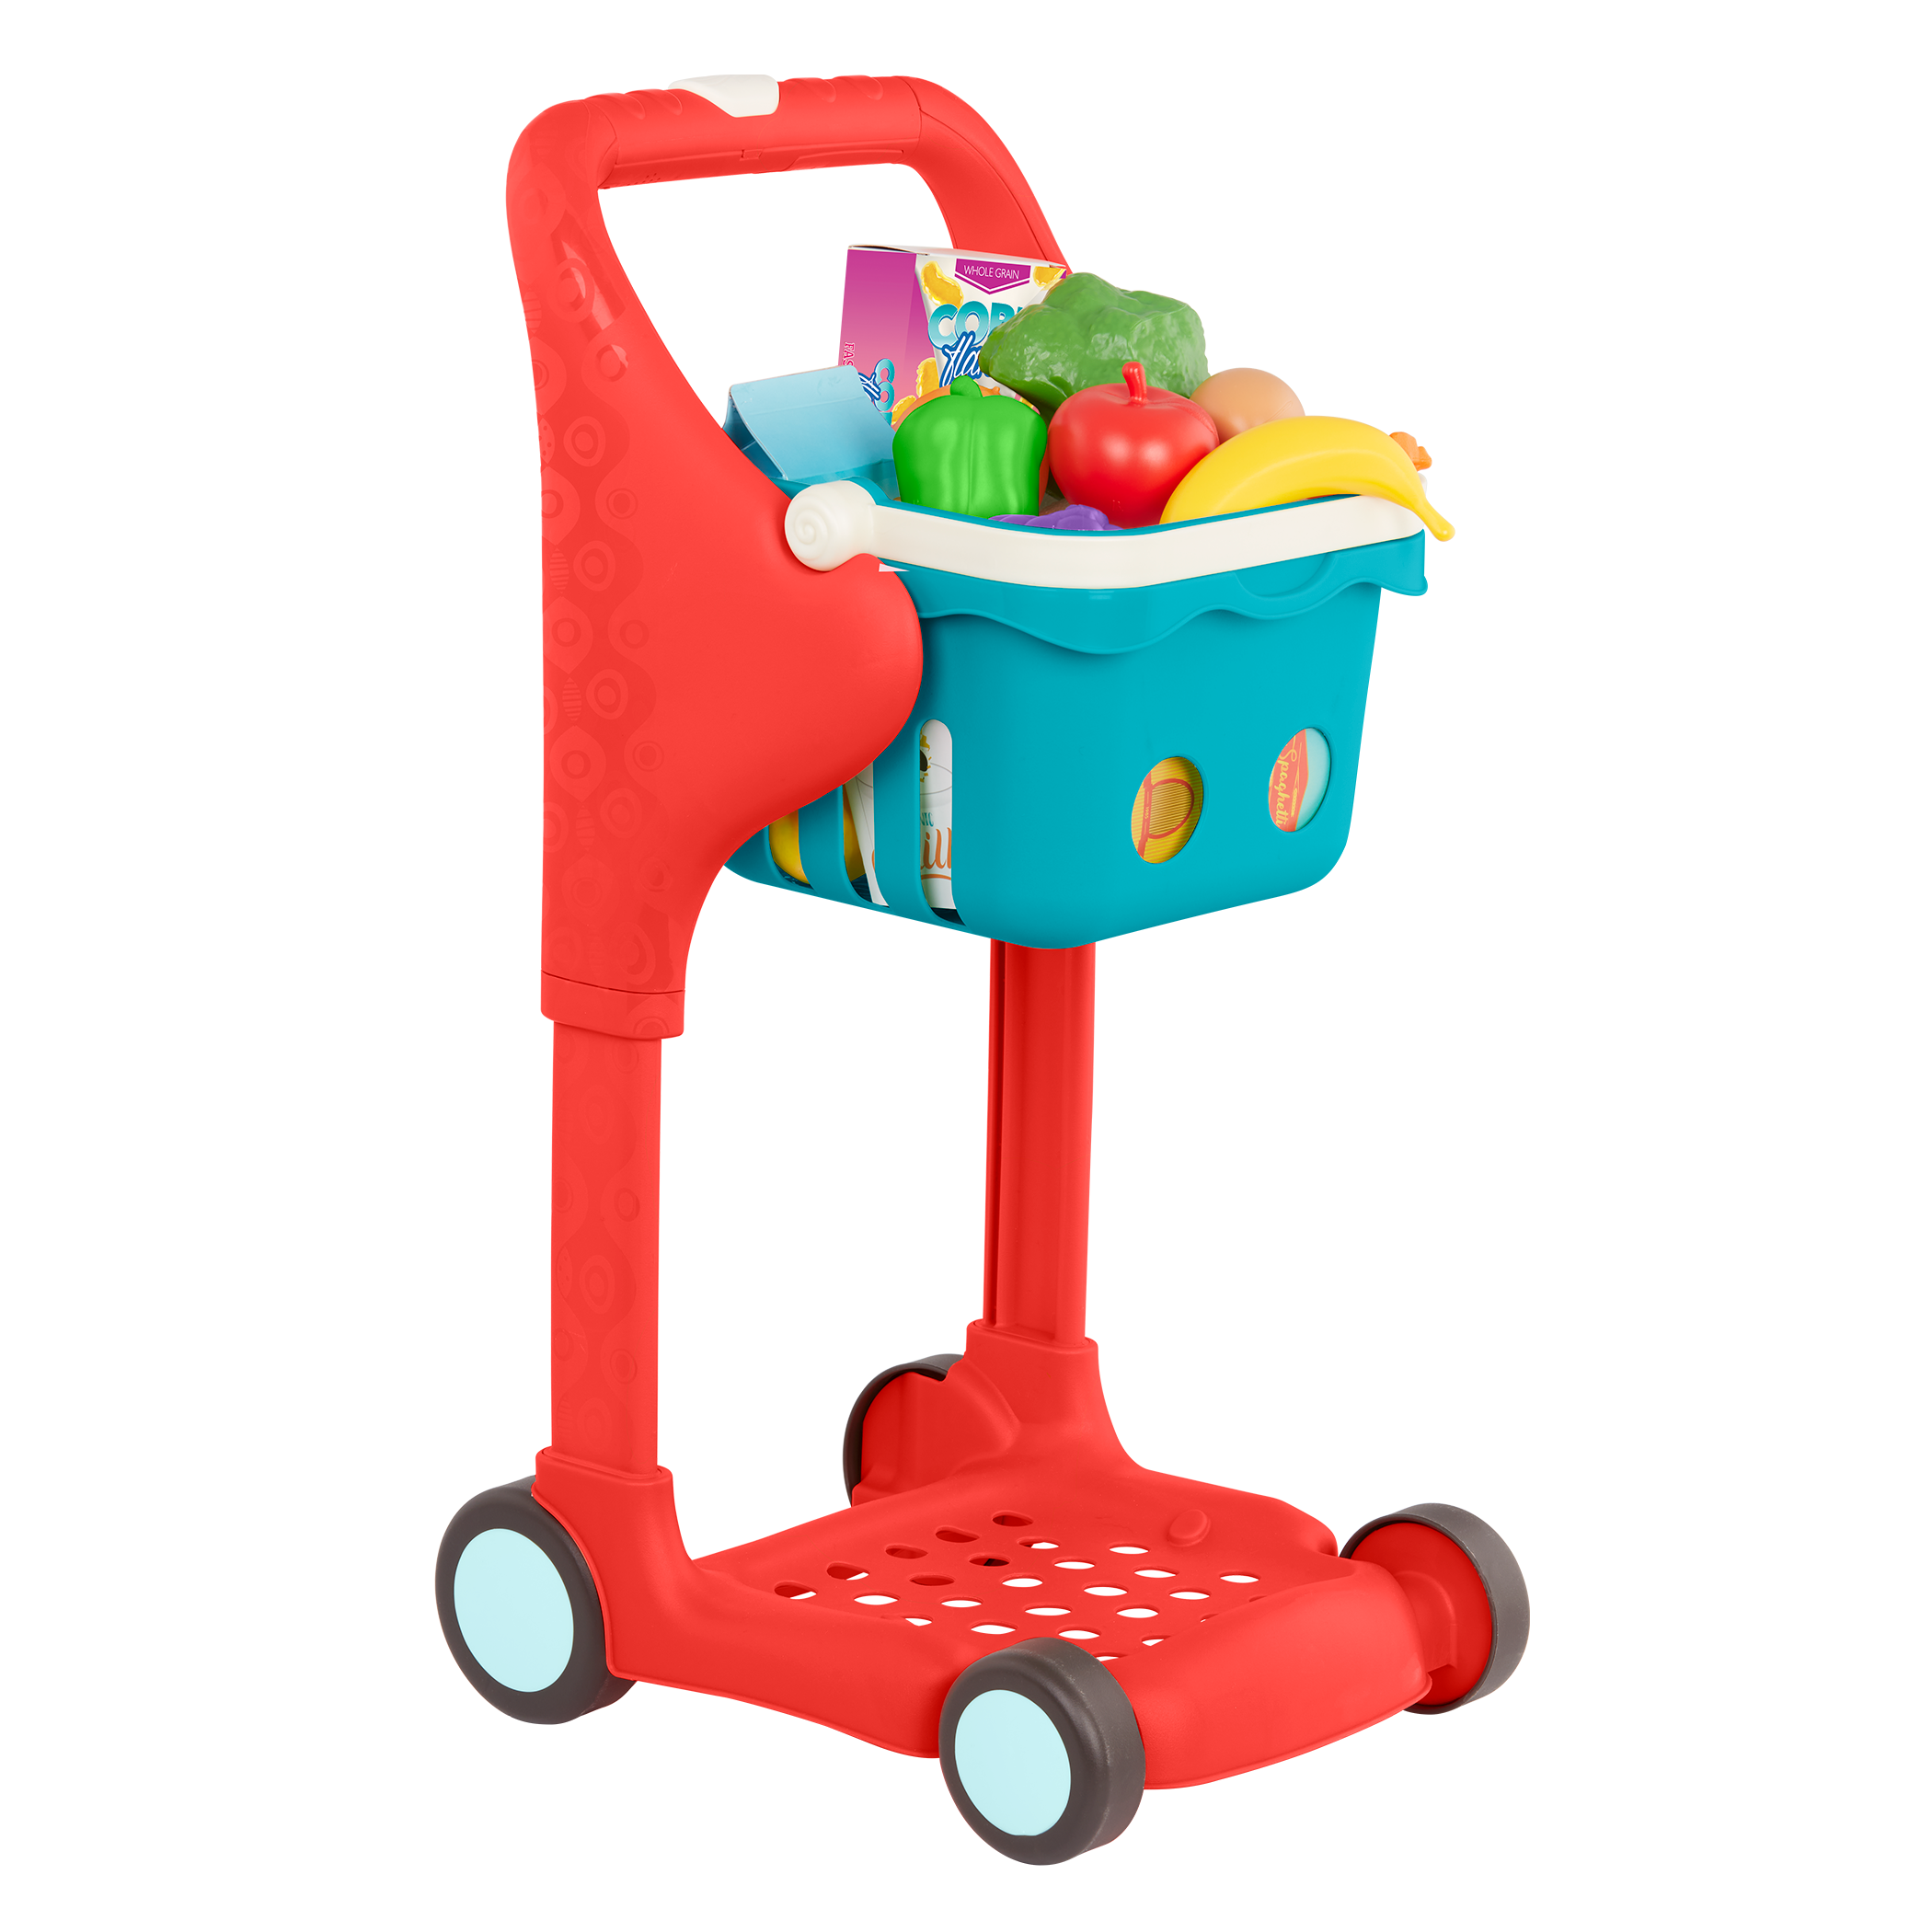 Toy shopping cart with groceries.